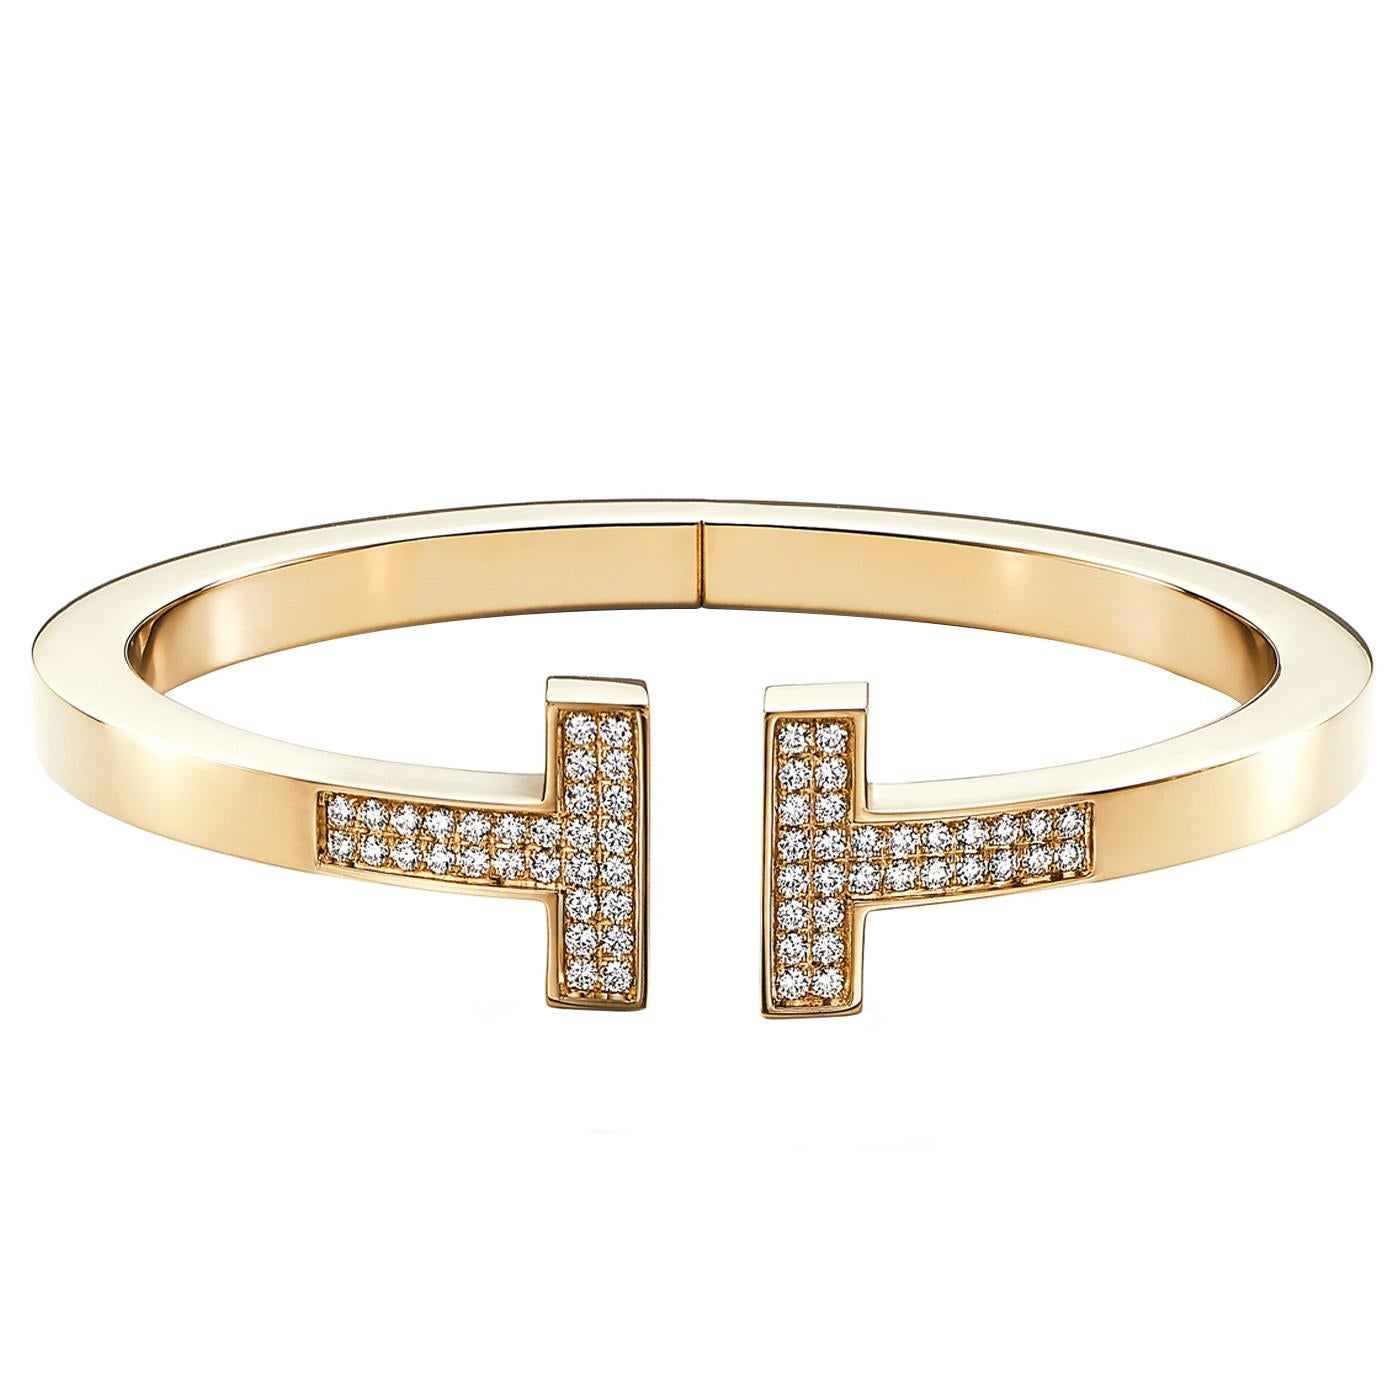 Pavé diamonds shine in this bold bracelet design. As multifaceted as it is iconic, the Tiffany T collection is a tangible reminder of the connections we feel but can't always see. Pair this diamond bracelet with other Tiffany T designs for a look